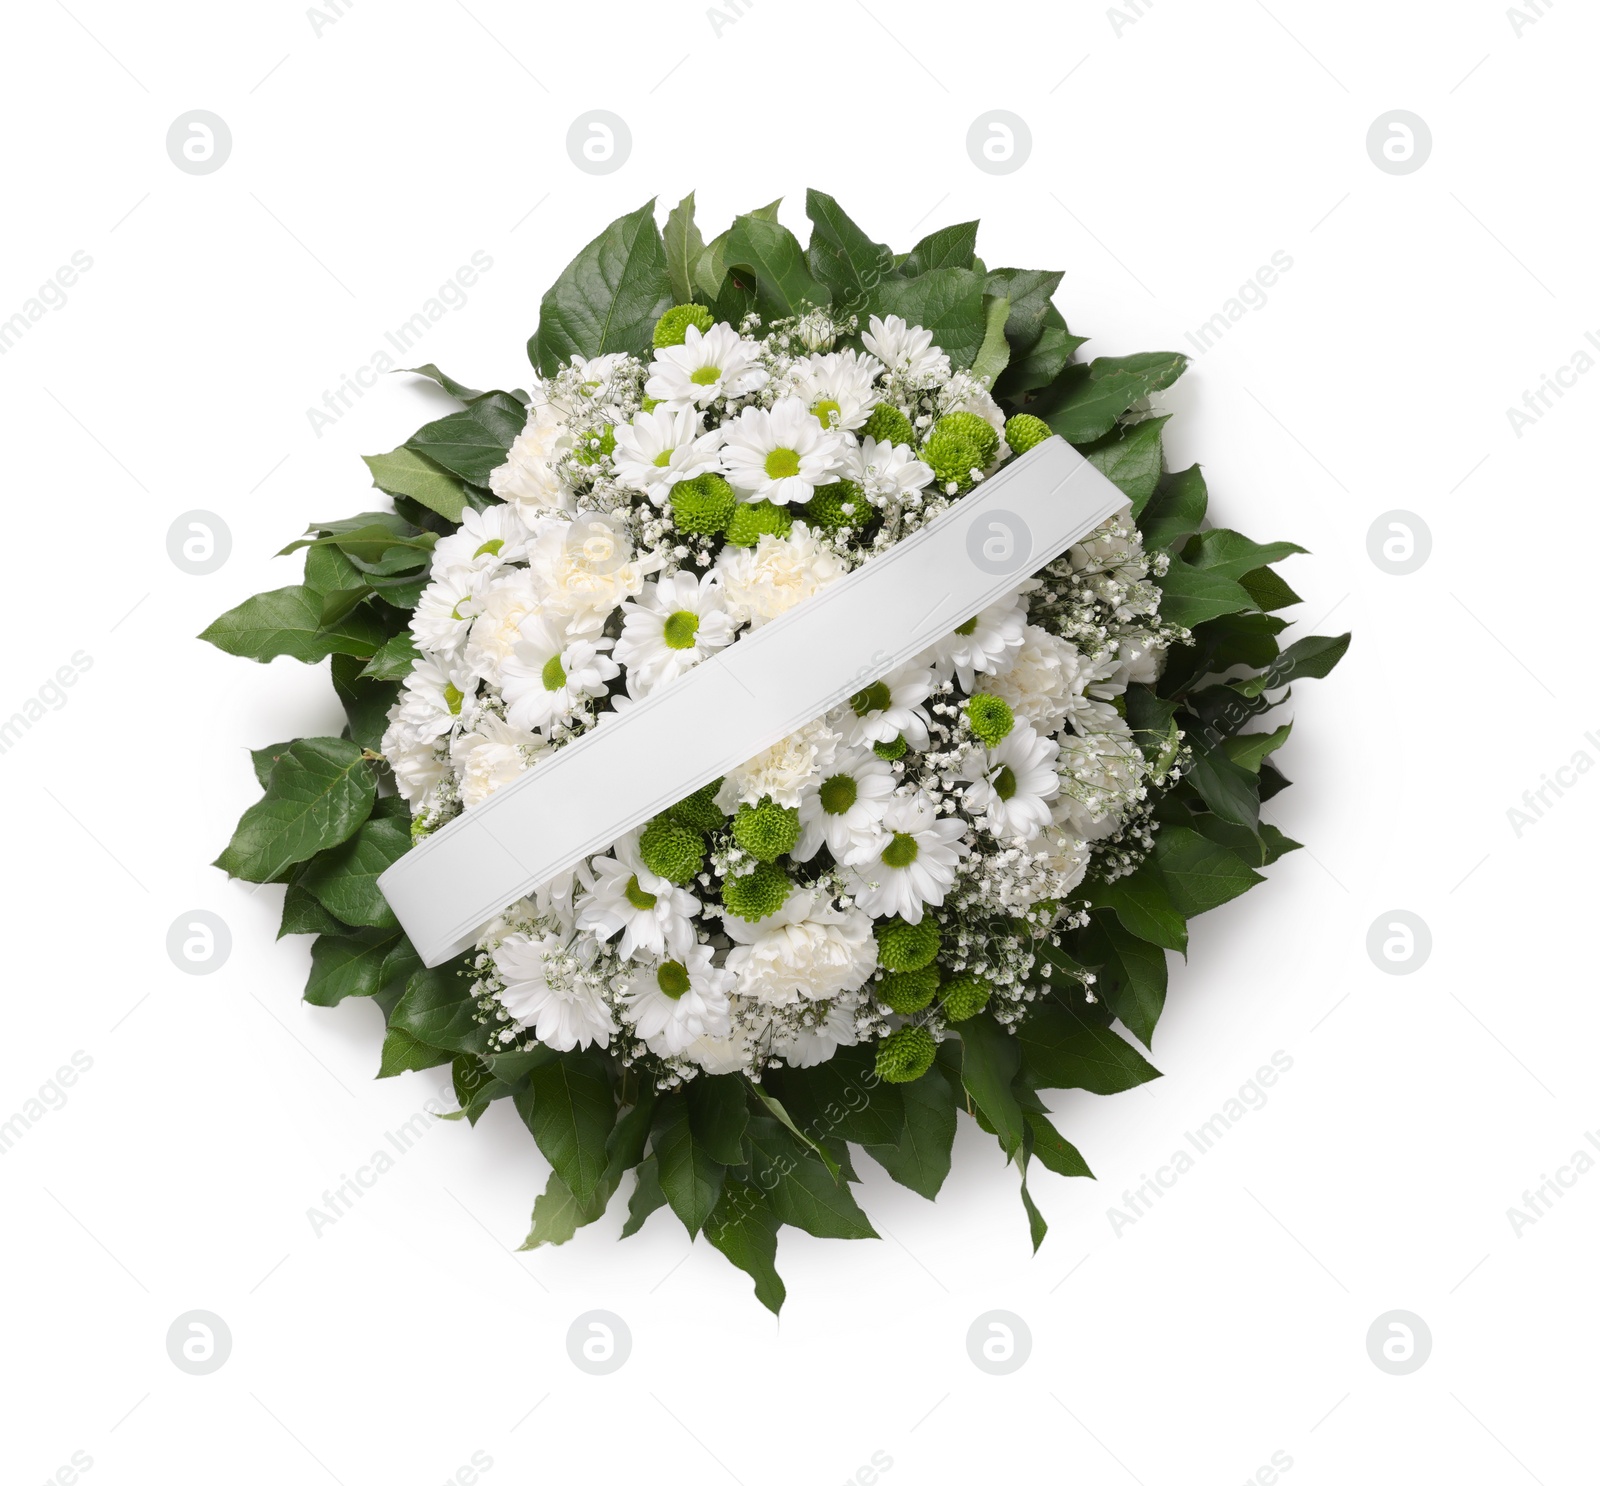 Photo of Funeral wreath of flowers with ribbon on white background, top view